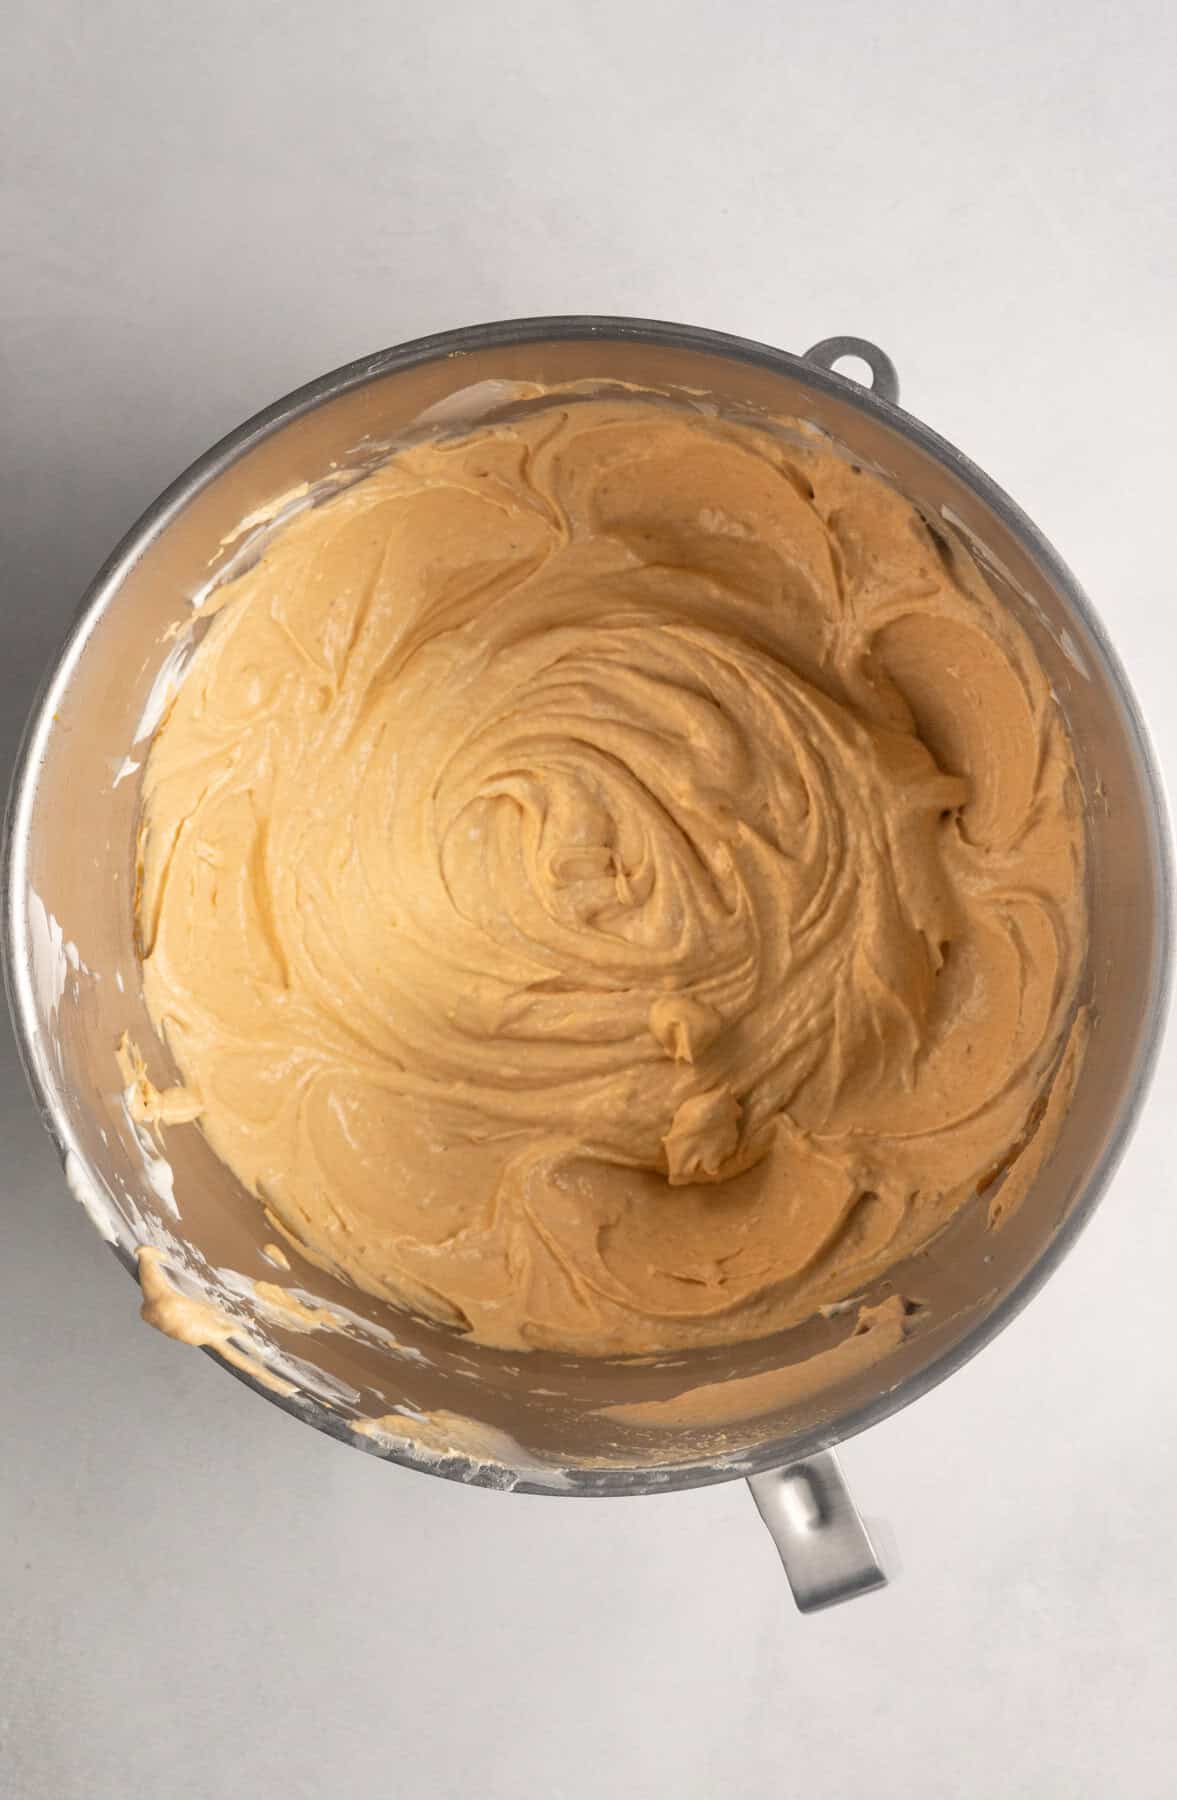 The pumpkin puree for gluten free pumpkin cheesecake has been added to the mixture.